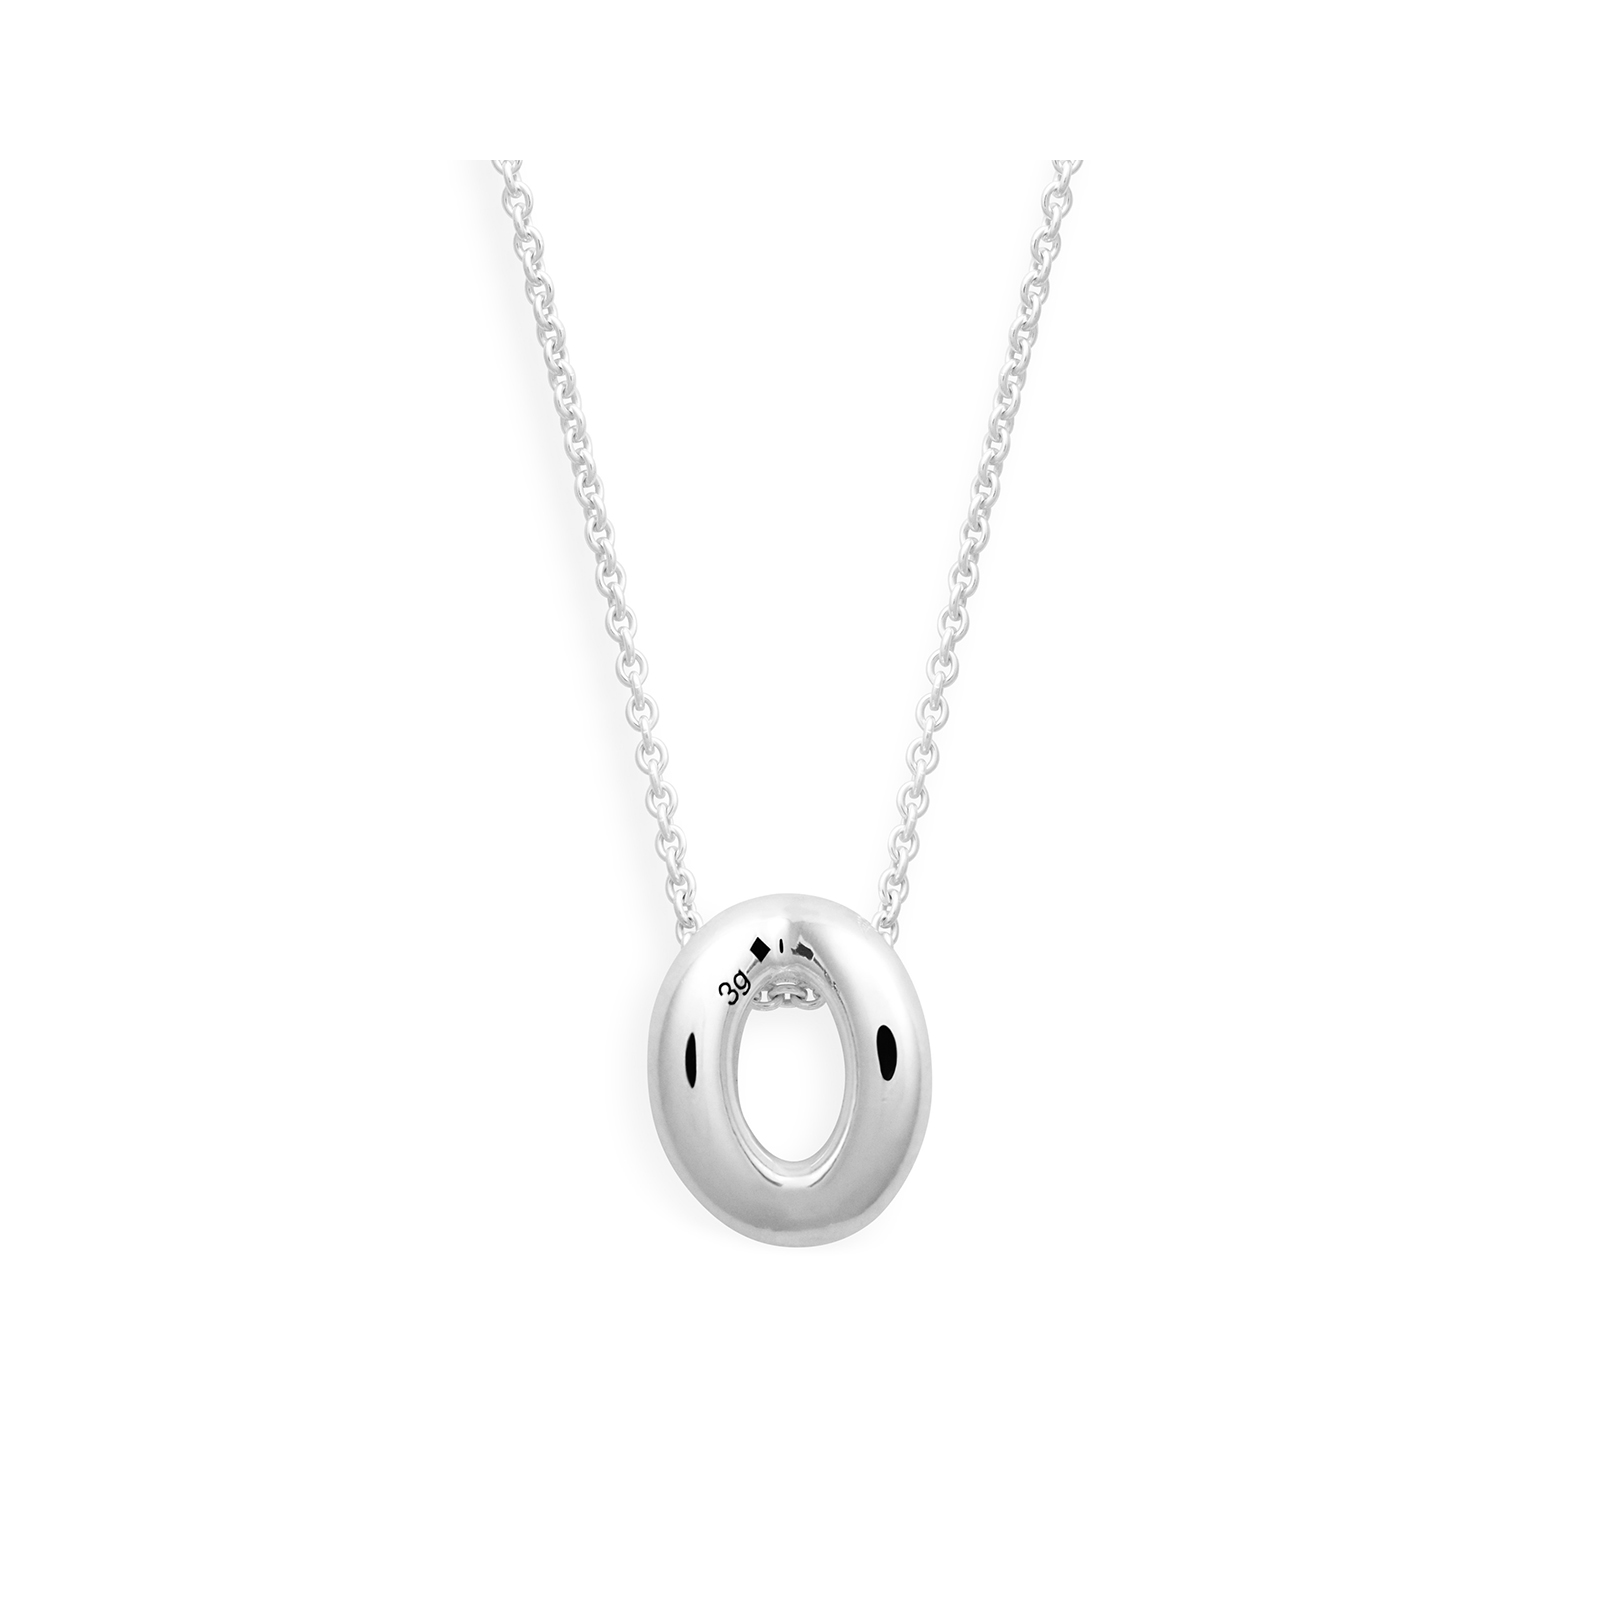 3g polished entrelacs pendant and chain necklace